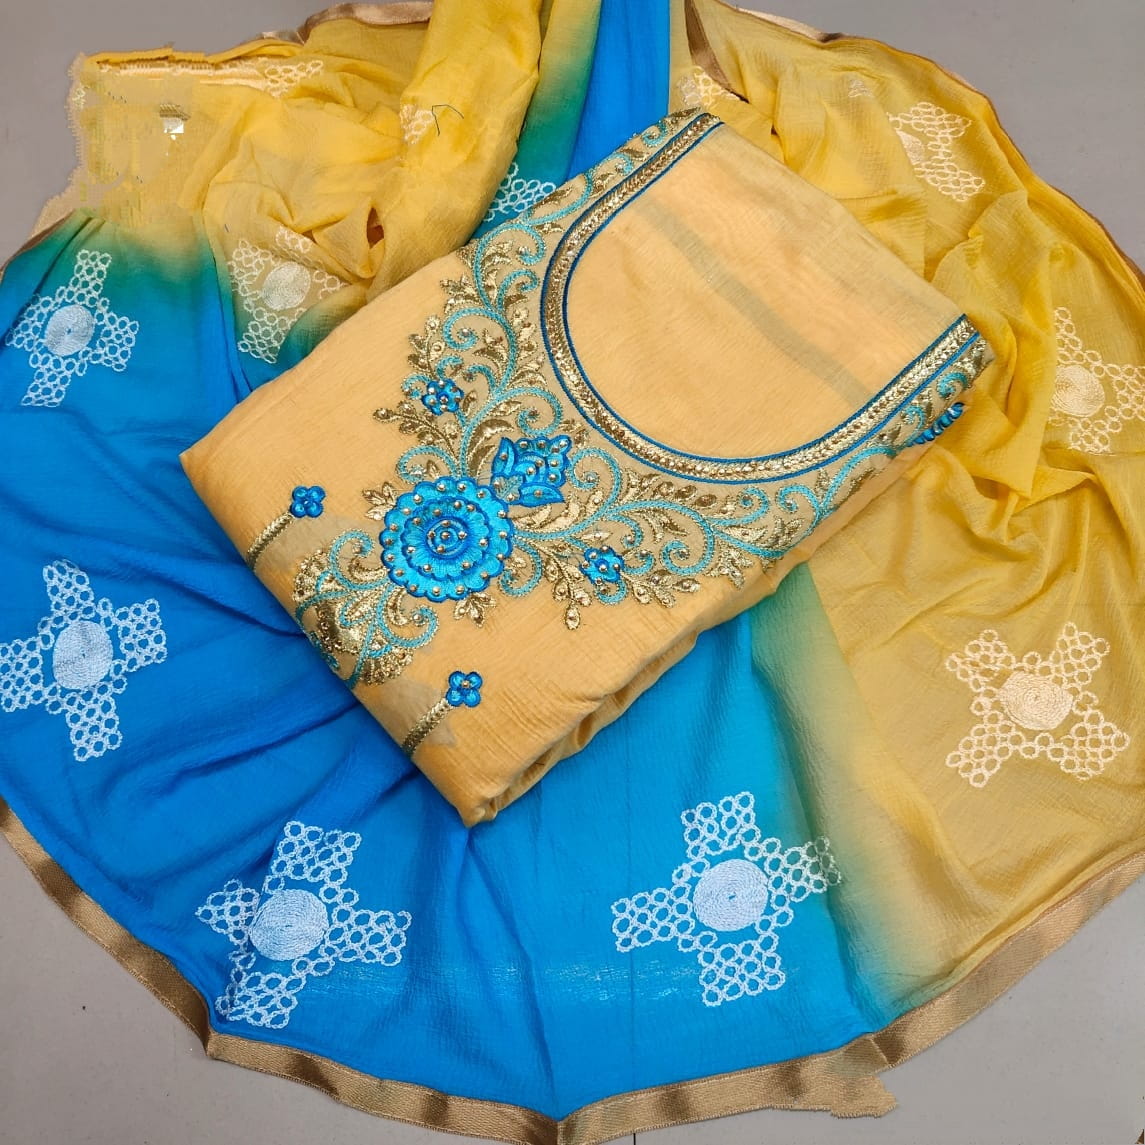 Tremendous Sky Blue & Yellow Chanderi Cotton Embroidered Work Salwar Suit for Women